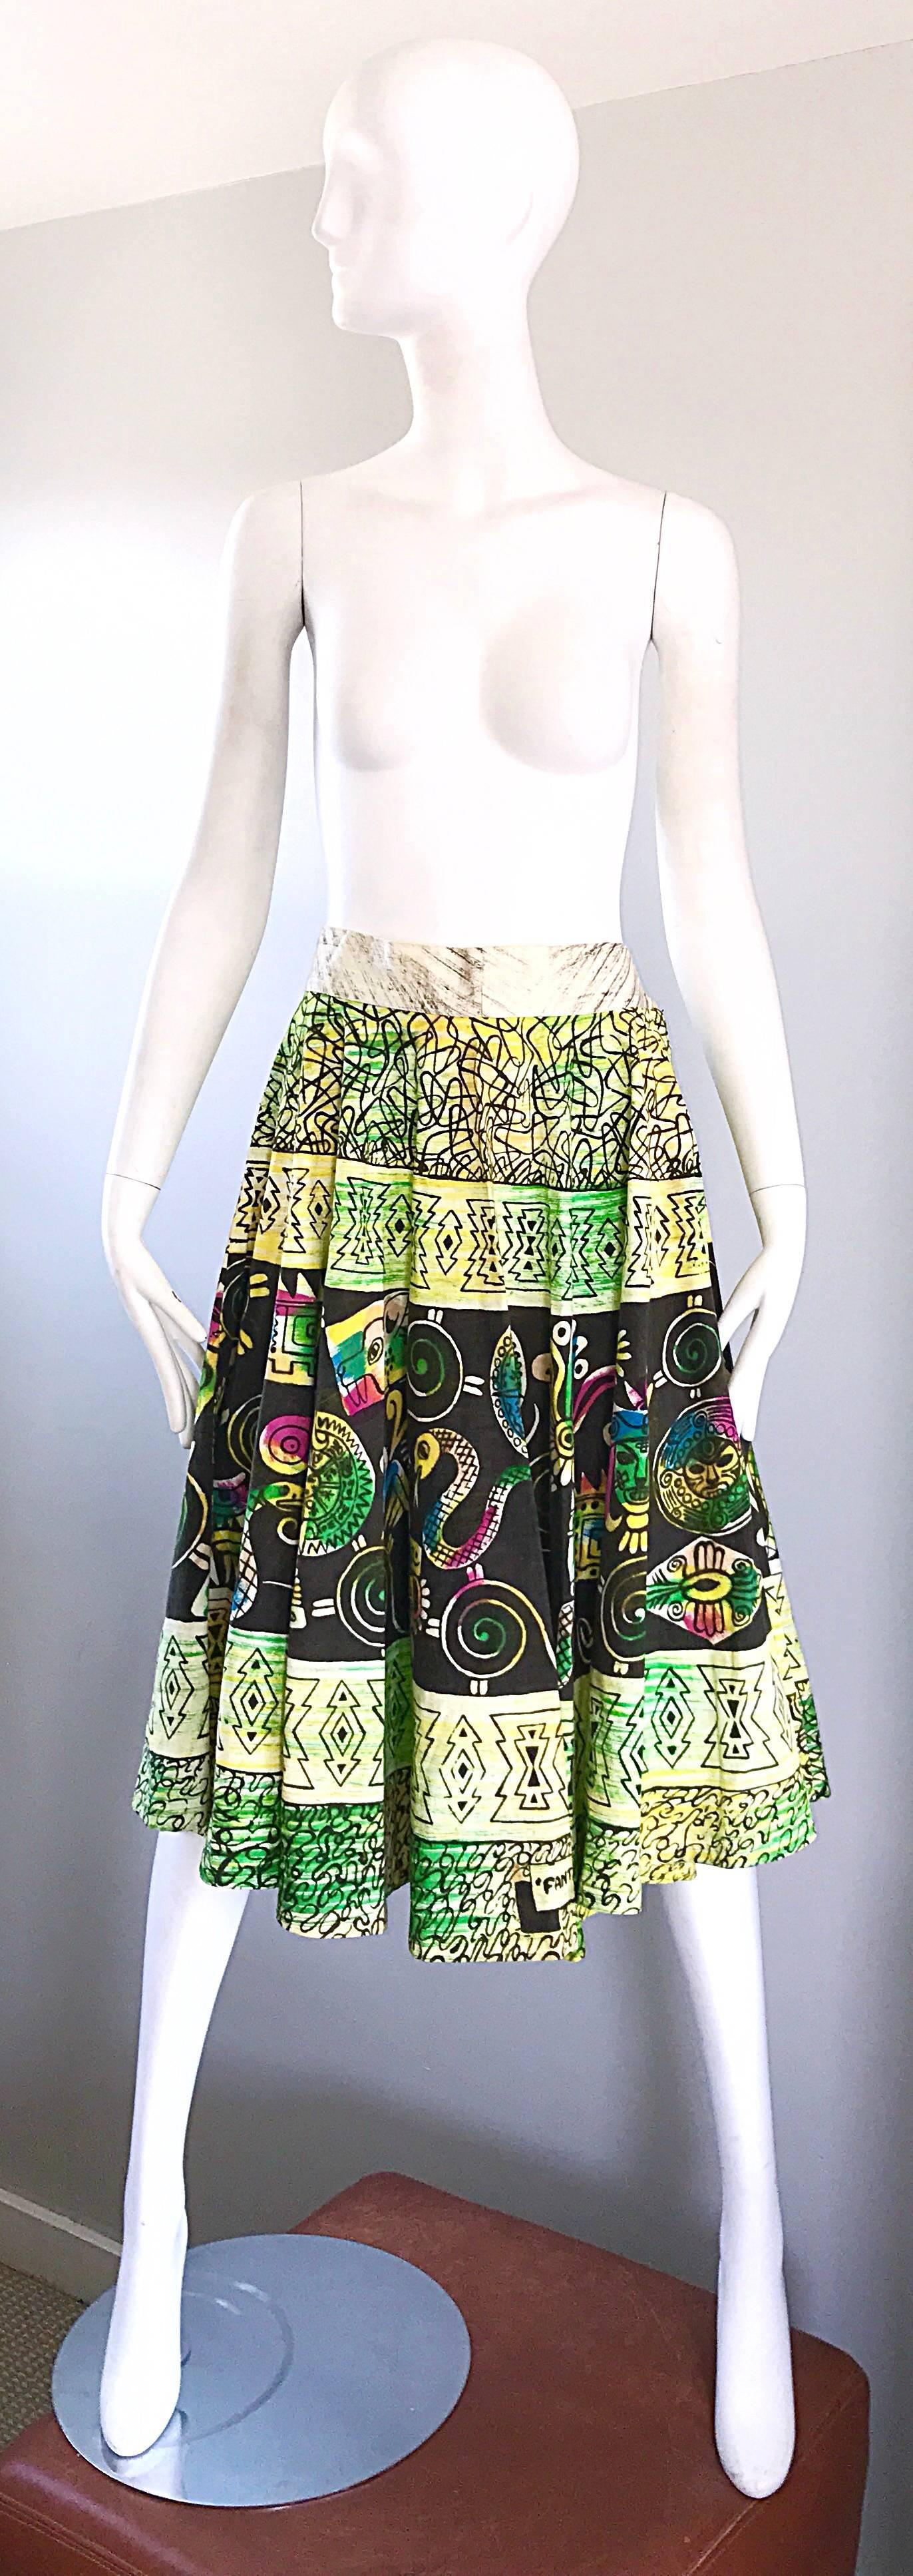 Amazing and very rare 1950s hand painted Mexiacan cotton skirt! Features Aztec/Myan handpainted characters throughout. Vibrant colors of green, pink, blue, yellow and black. Full metal zipper up the side with hook-and-eye closure. Can easily be